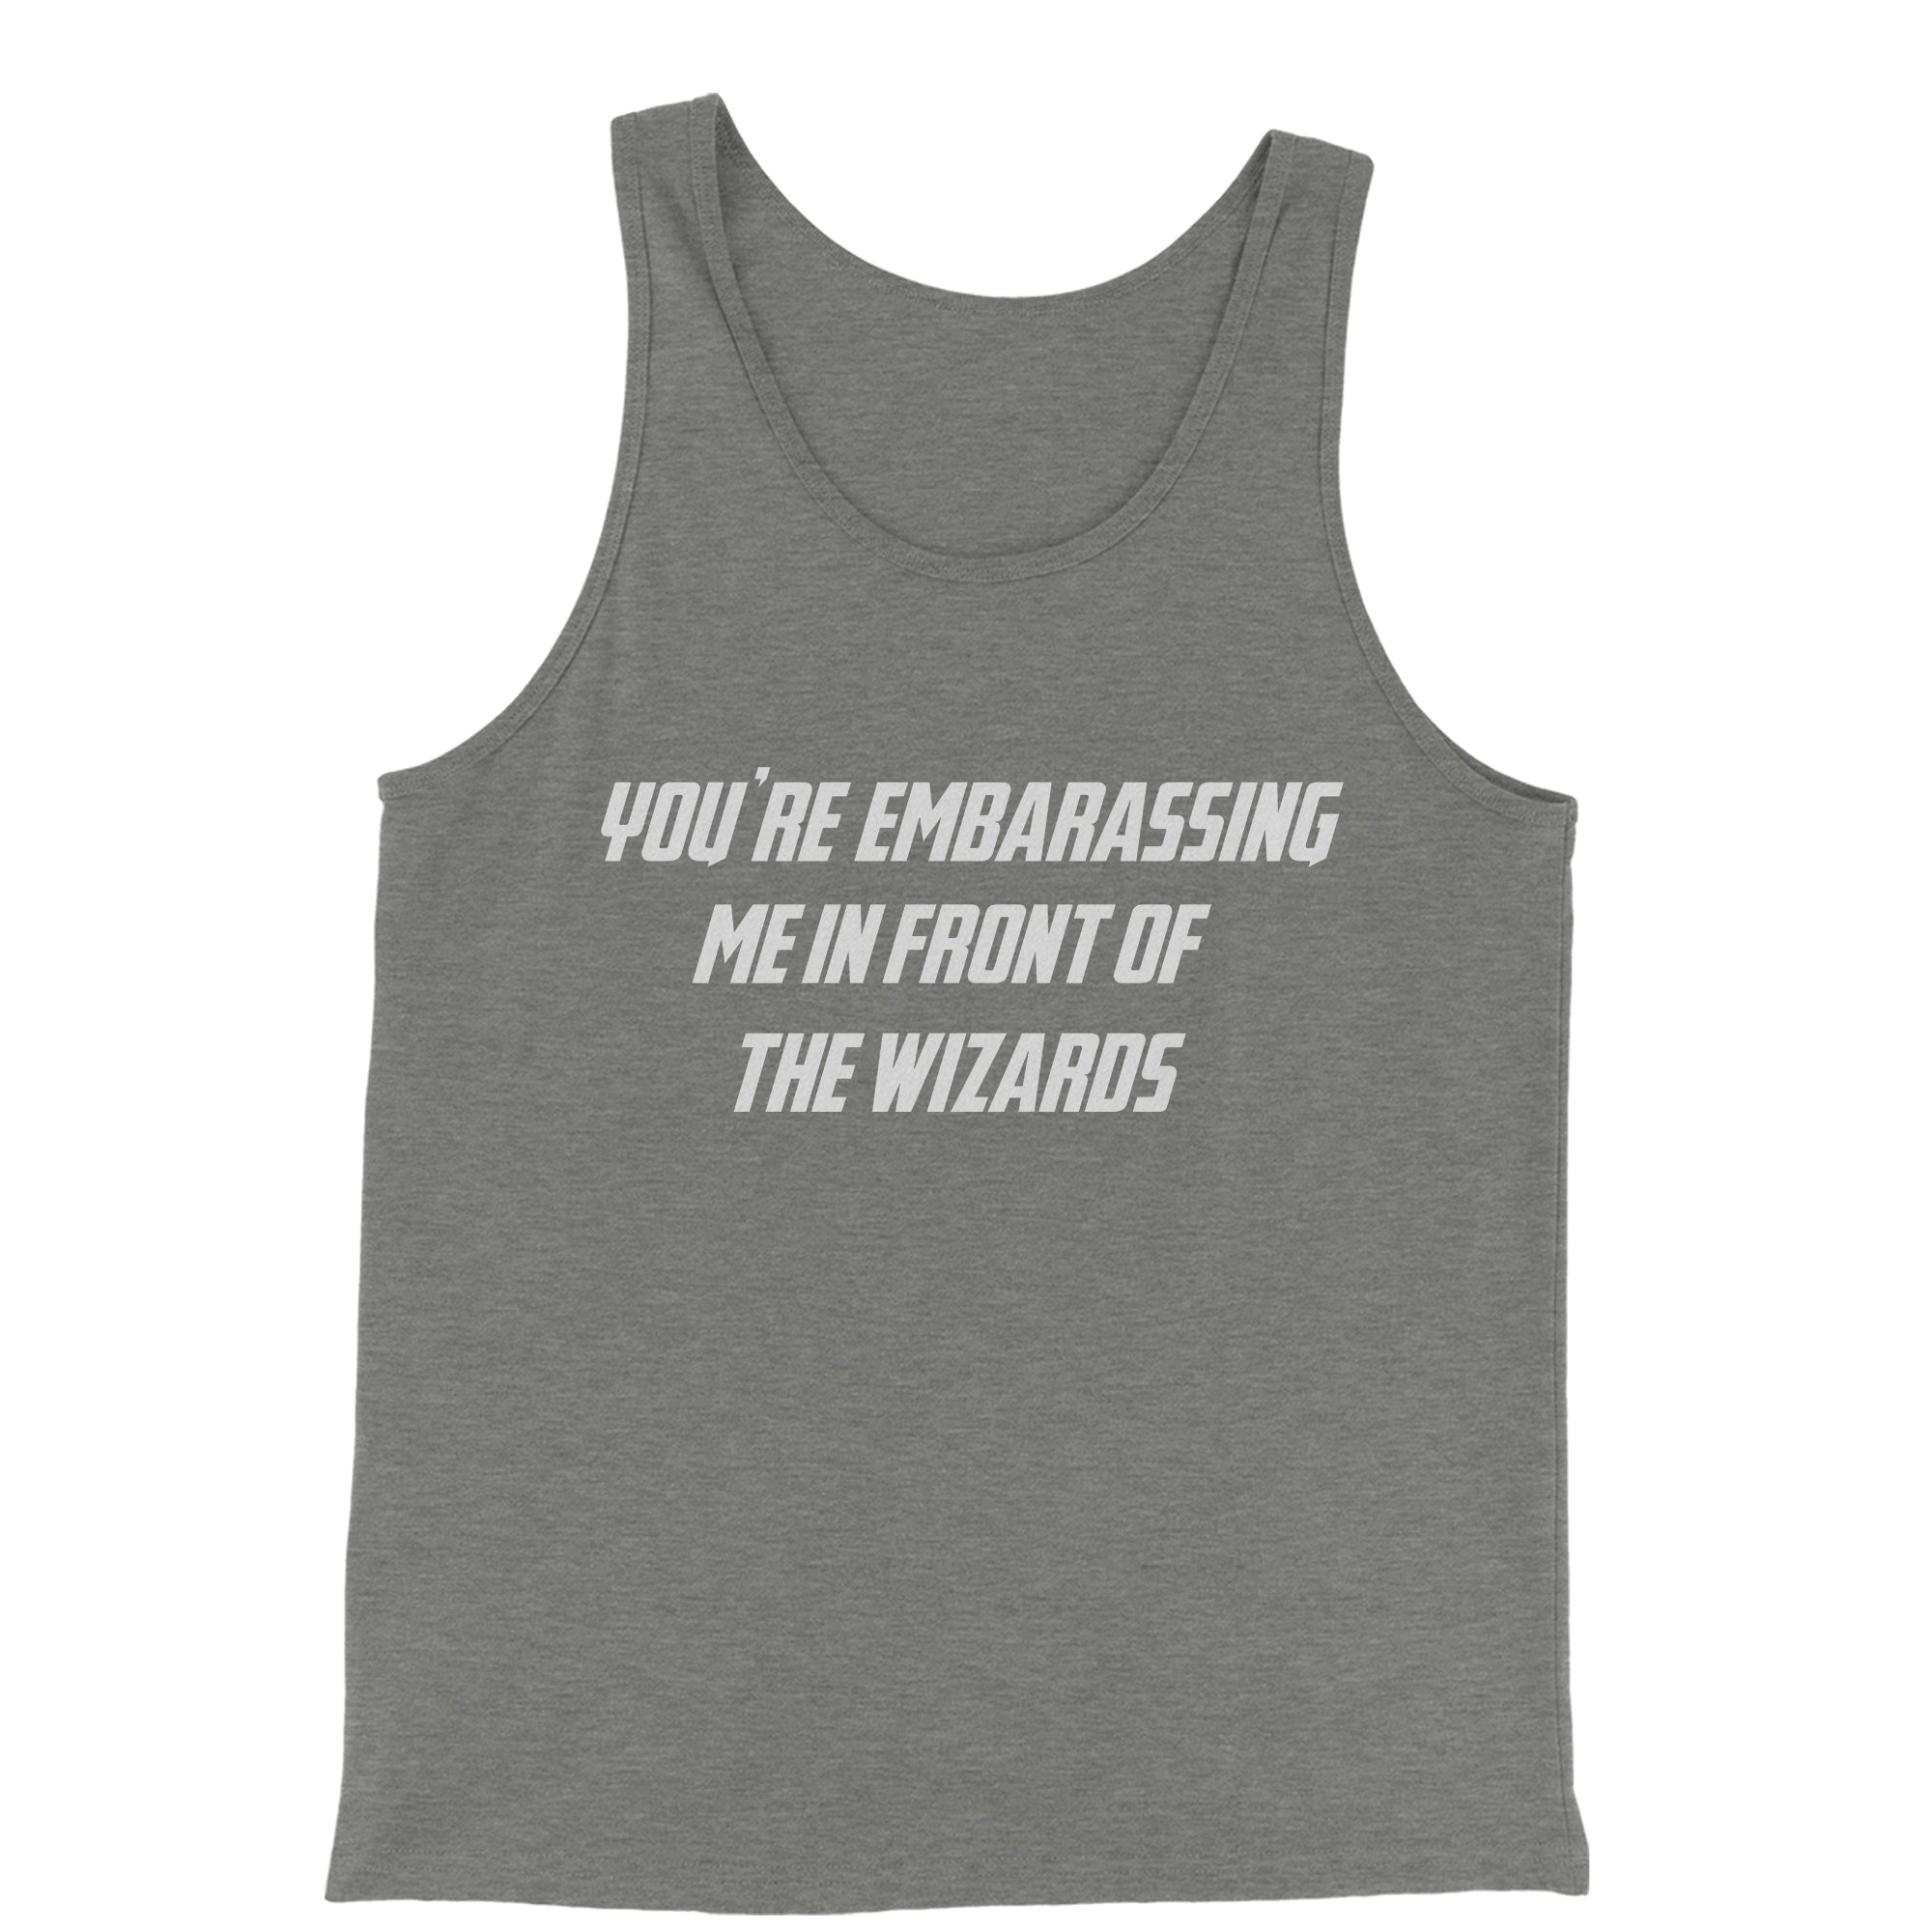 Embarassing Wizards Funny Wars of Infinity Quote Men's Jersey Tank